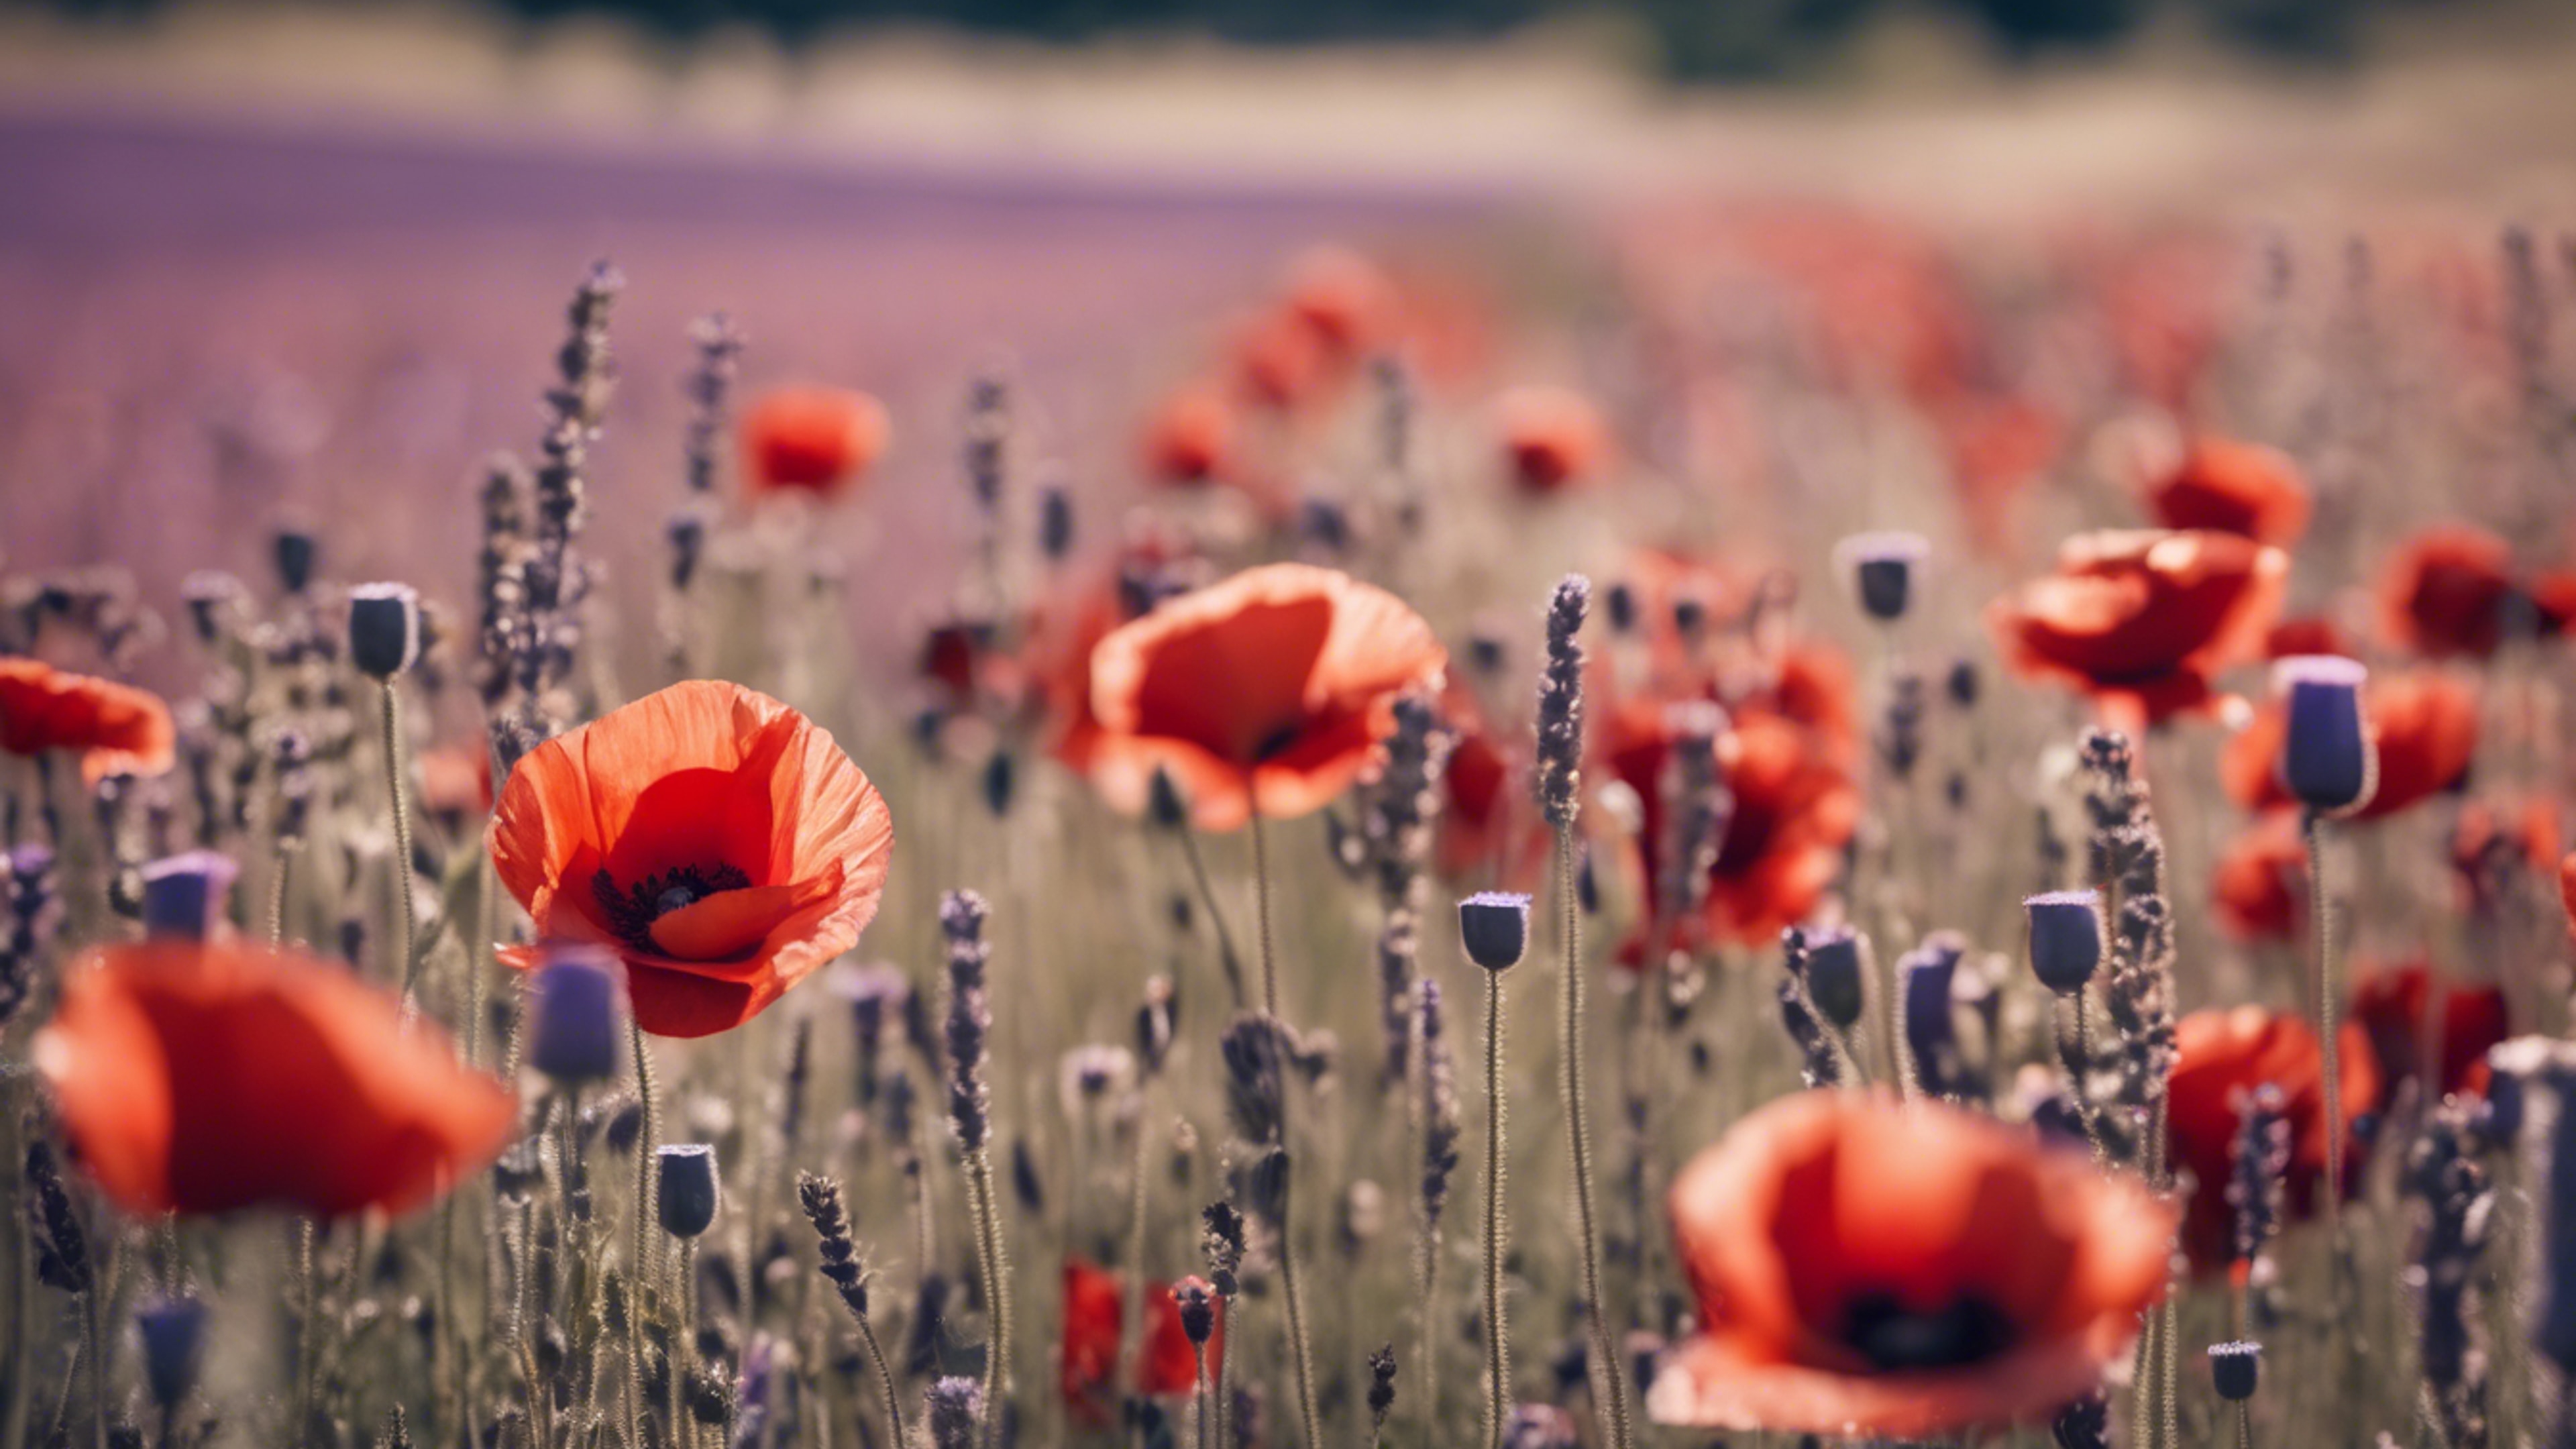 A field of red poppies naturally fading into a lavender field. Tapetai[76e938c2507742cfb107]